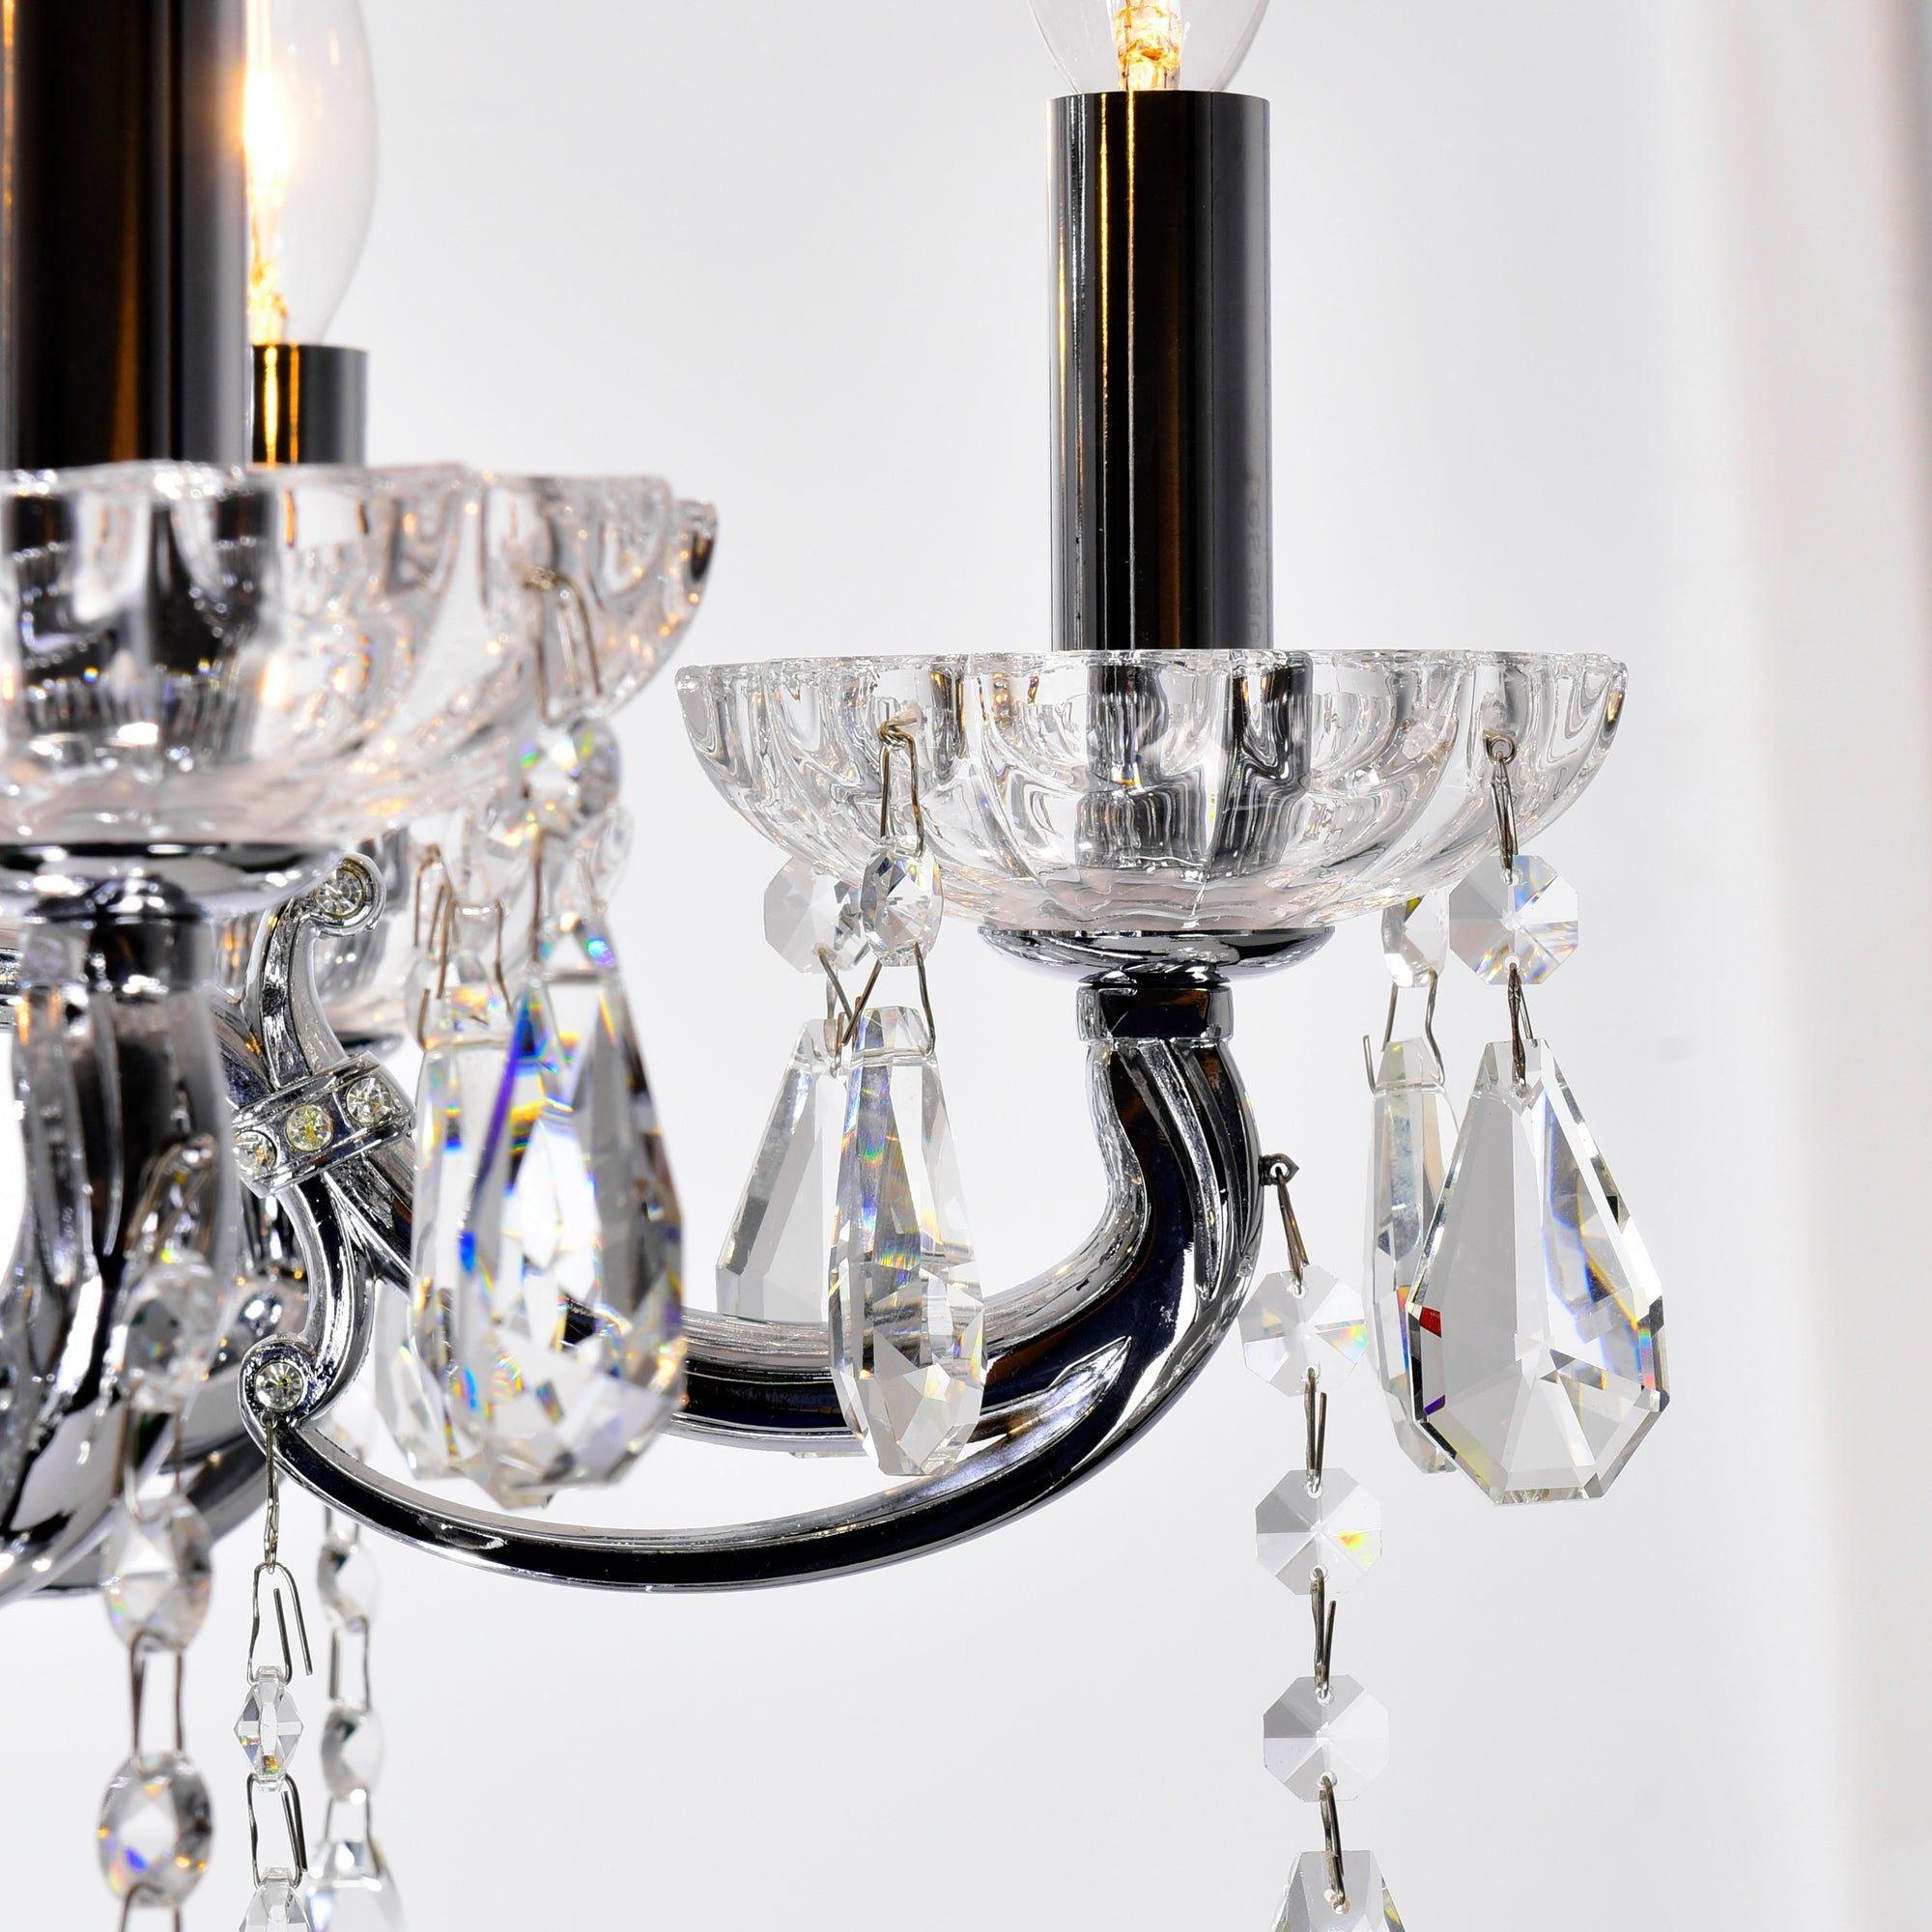 CWI - Glorious Chandelier - Lights Canada